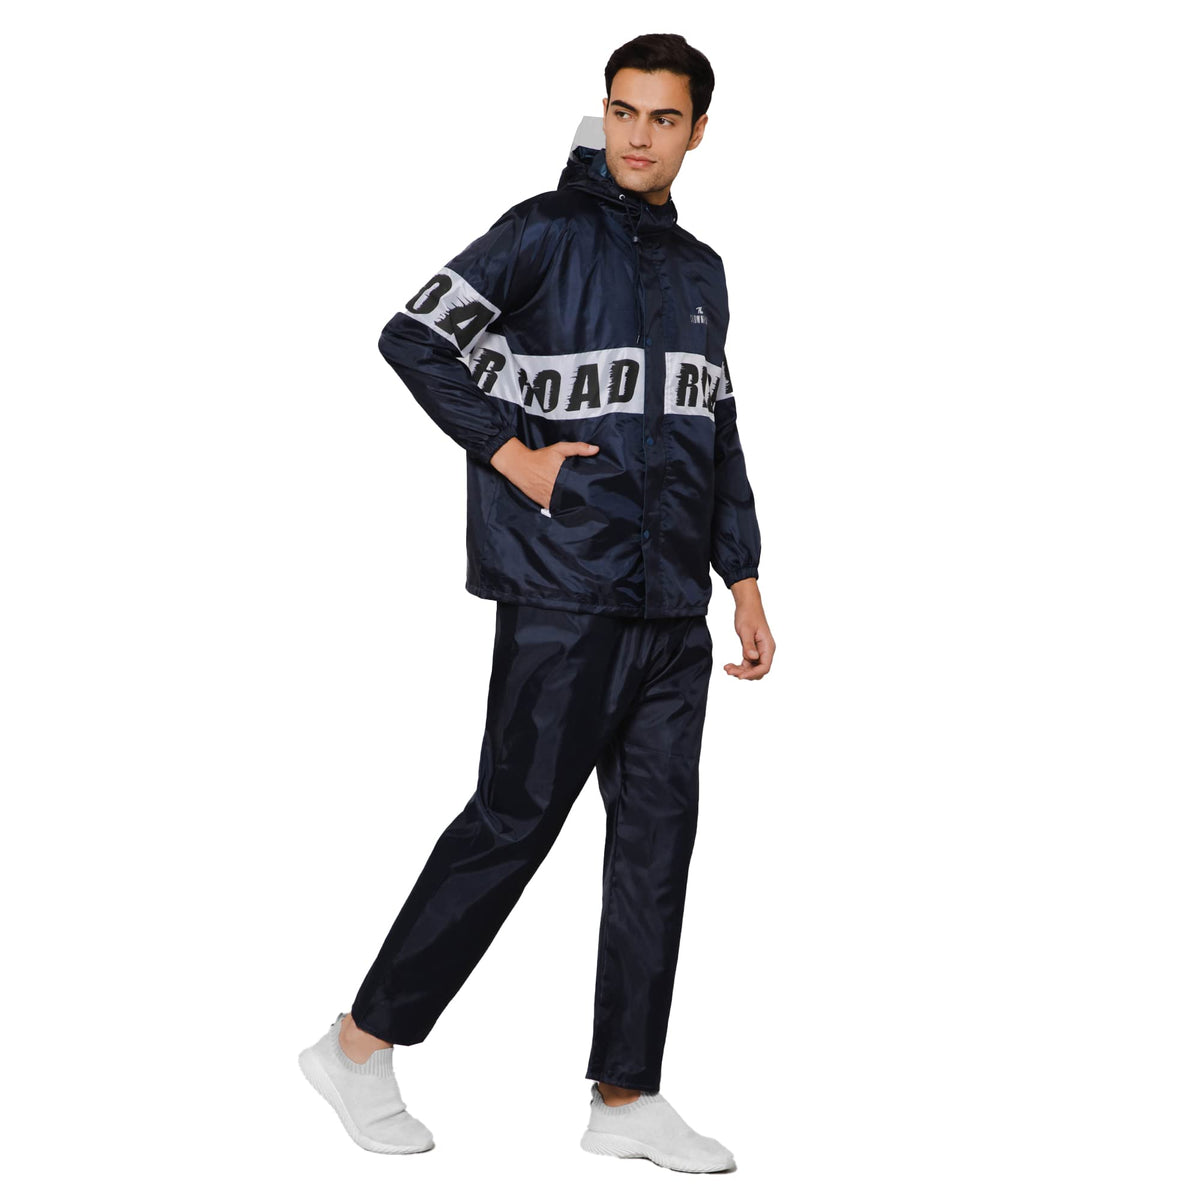 The Clownfish by STRAUSS Road Rider Men's Waterproof Raincoat Polyester Double Coating Reversible Rain Suit with Hood & Inner Mobile Pocket. Set of Top &Bottom. Printed Pouch (Navy Blue, X-Large)